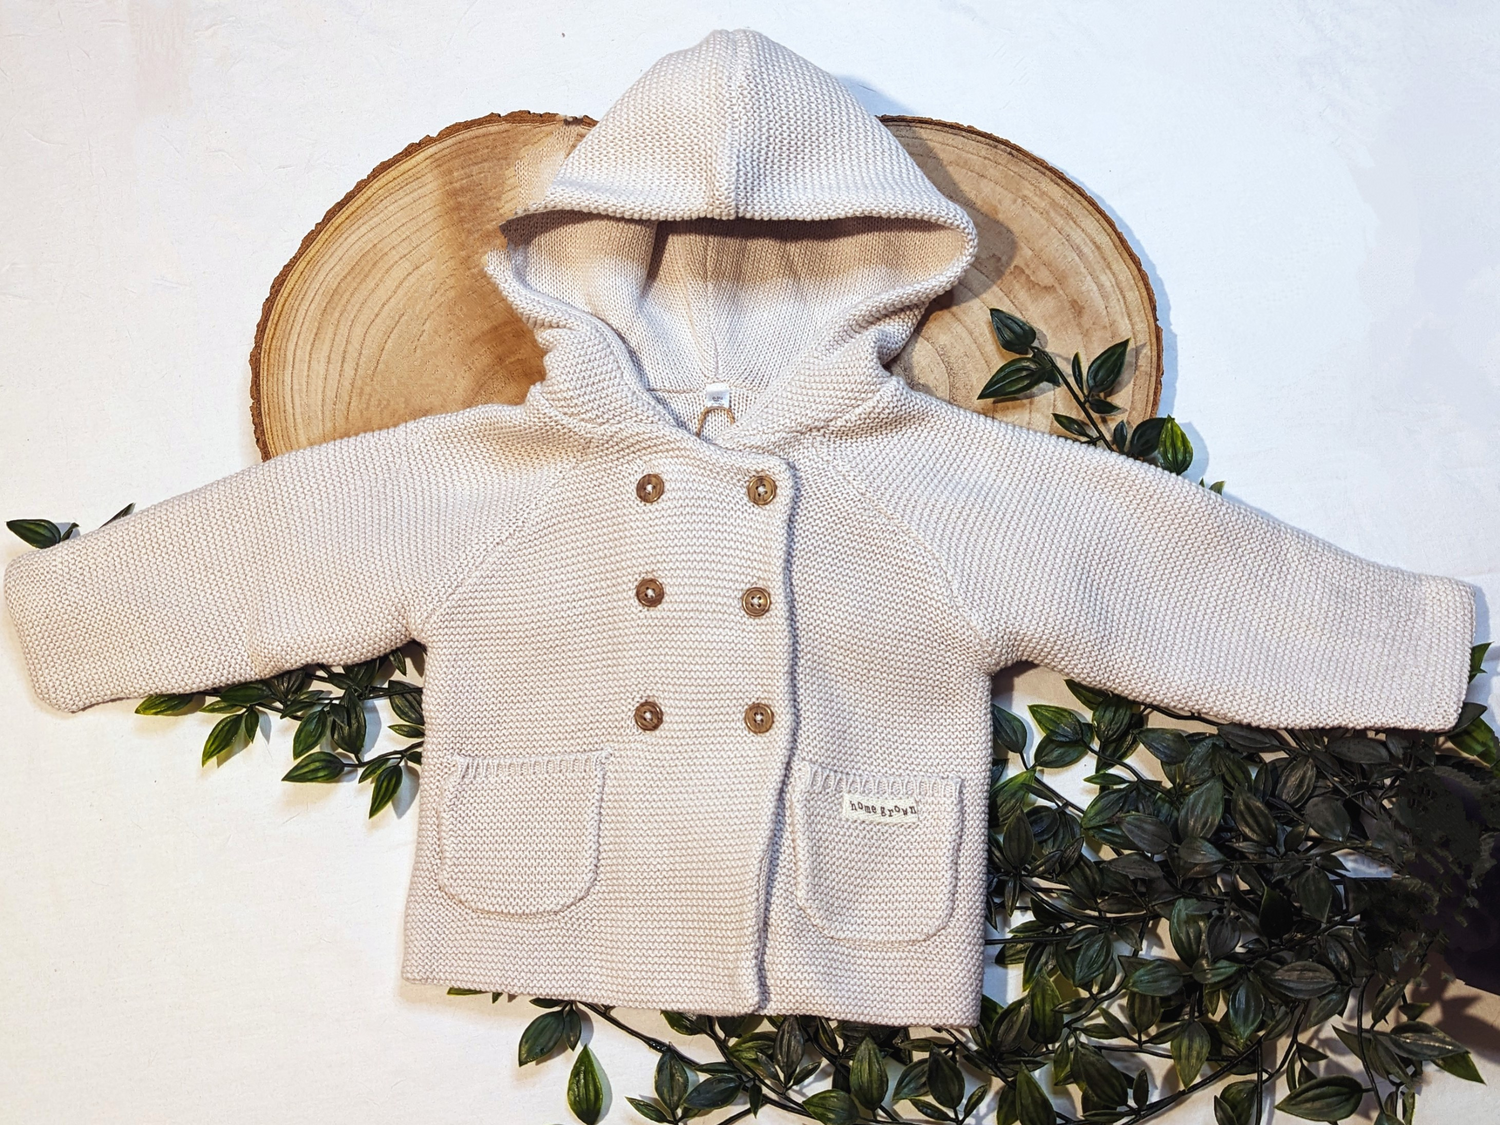 Unisex baby cardigan made from organic cotton. Beige colour with double breast wooden button. Knitted design with hood and 2 pockets. 